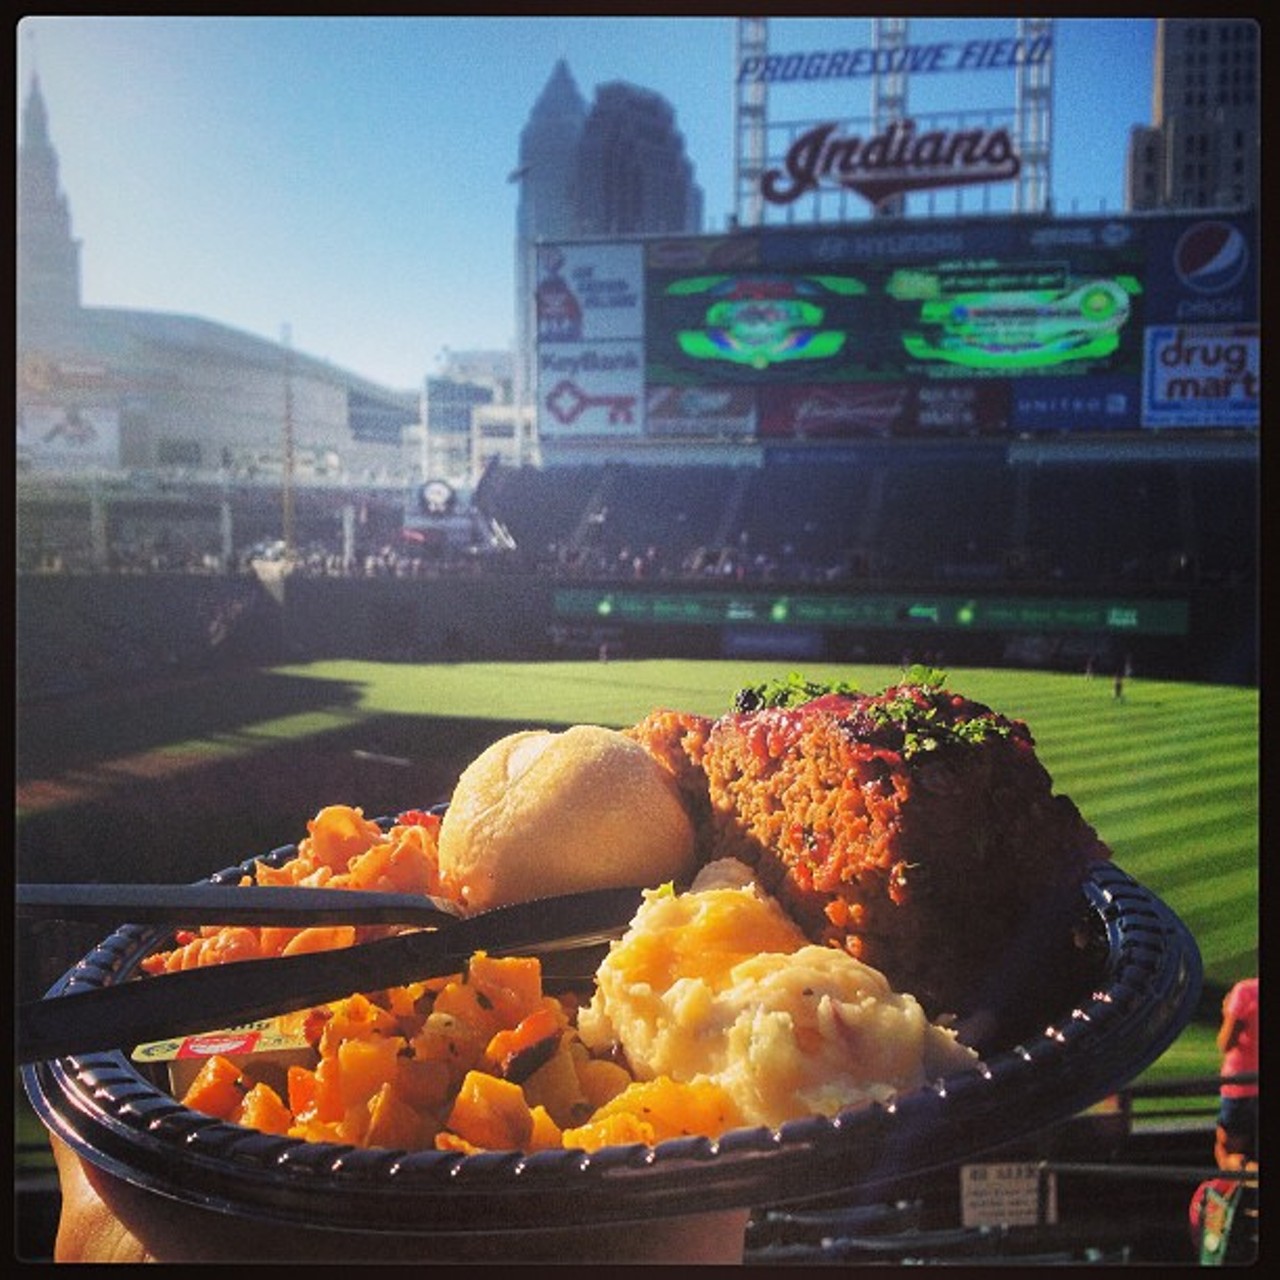 All you can eat meatloaf and #tribe #baseball! Yes please and thank you. #livin #life in #cleveland #tribetime